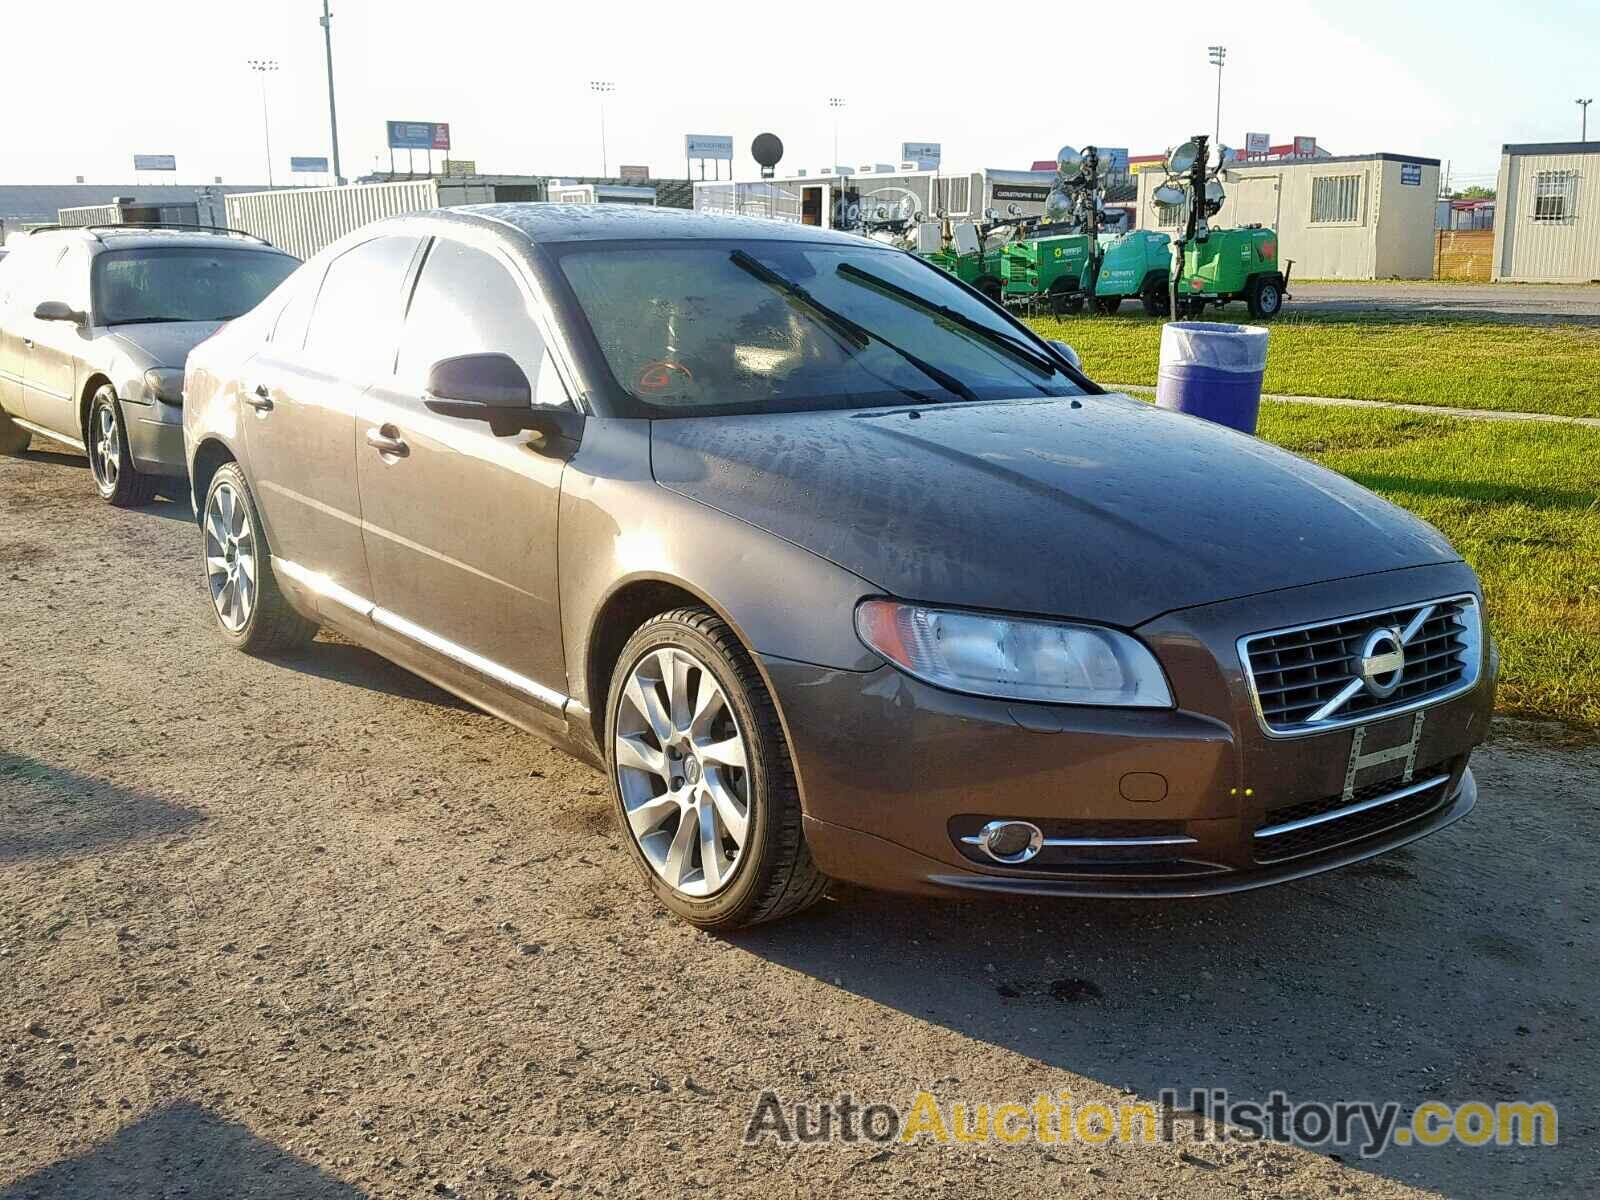 2013 VOLVO S80 3.2, YV1952AS4D1170313